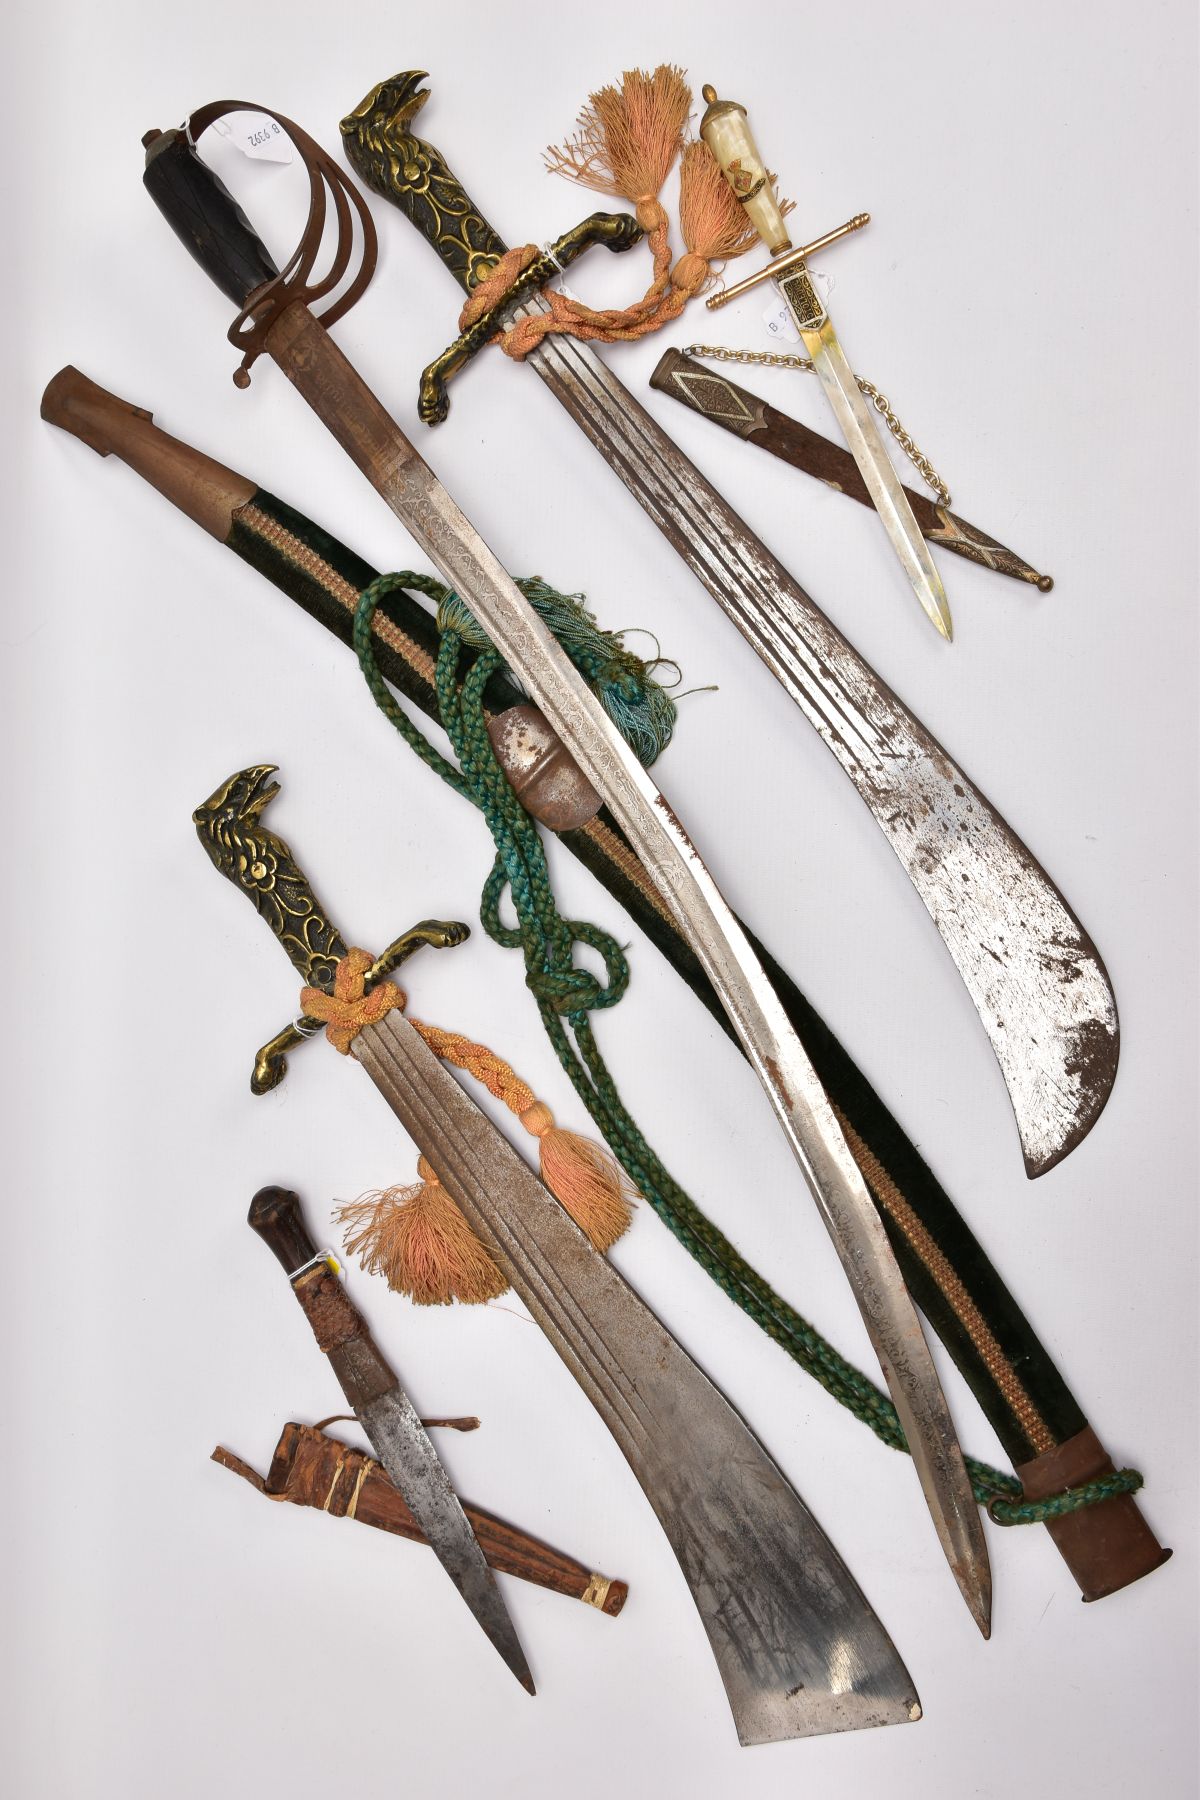 FIVE ASSORTED BLADED WEAPONS, two small short swords, curved blades, poorly constructed, knots in